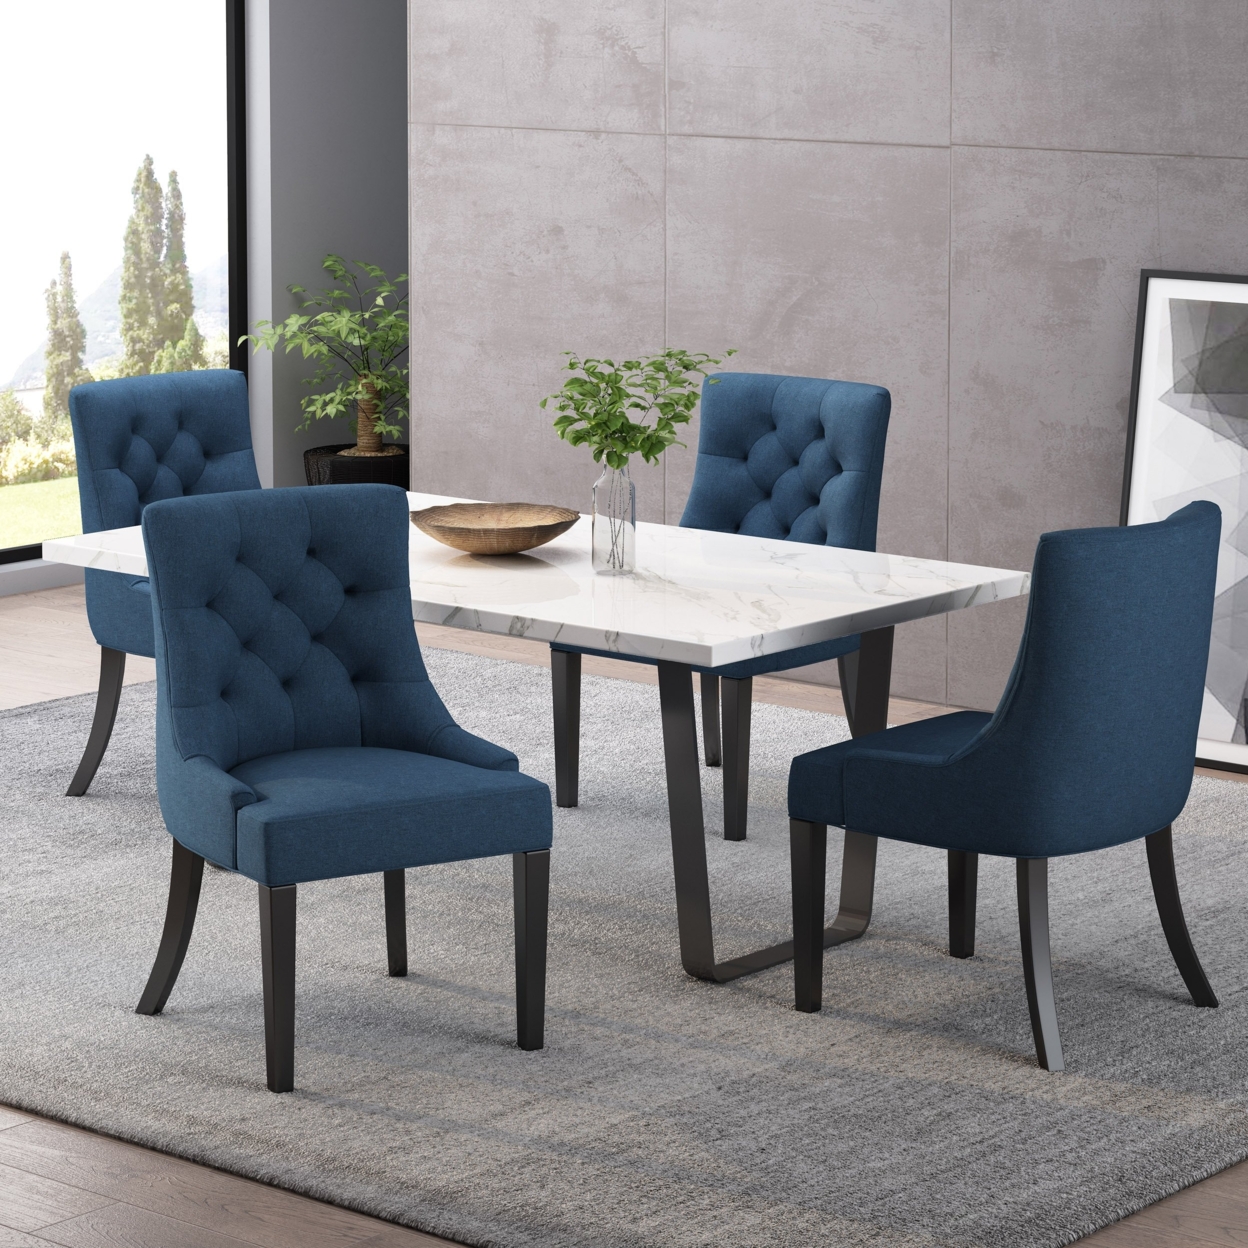 Stacy Hourglass Fabric Dining Chairs (Set Of 4) - Navy Blue